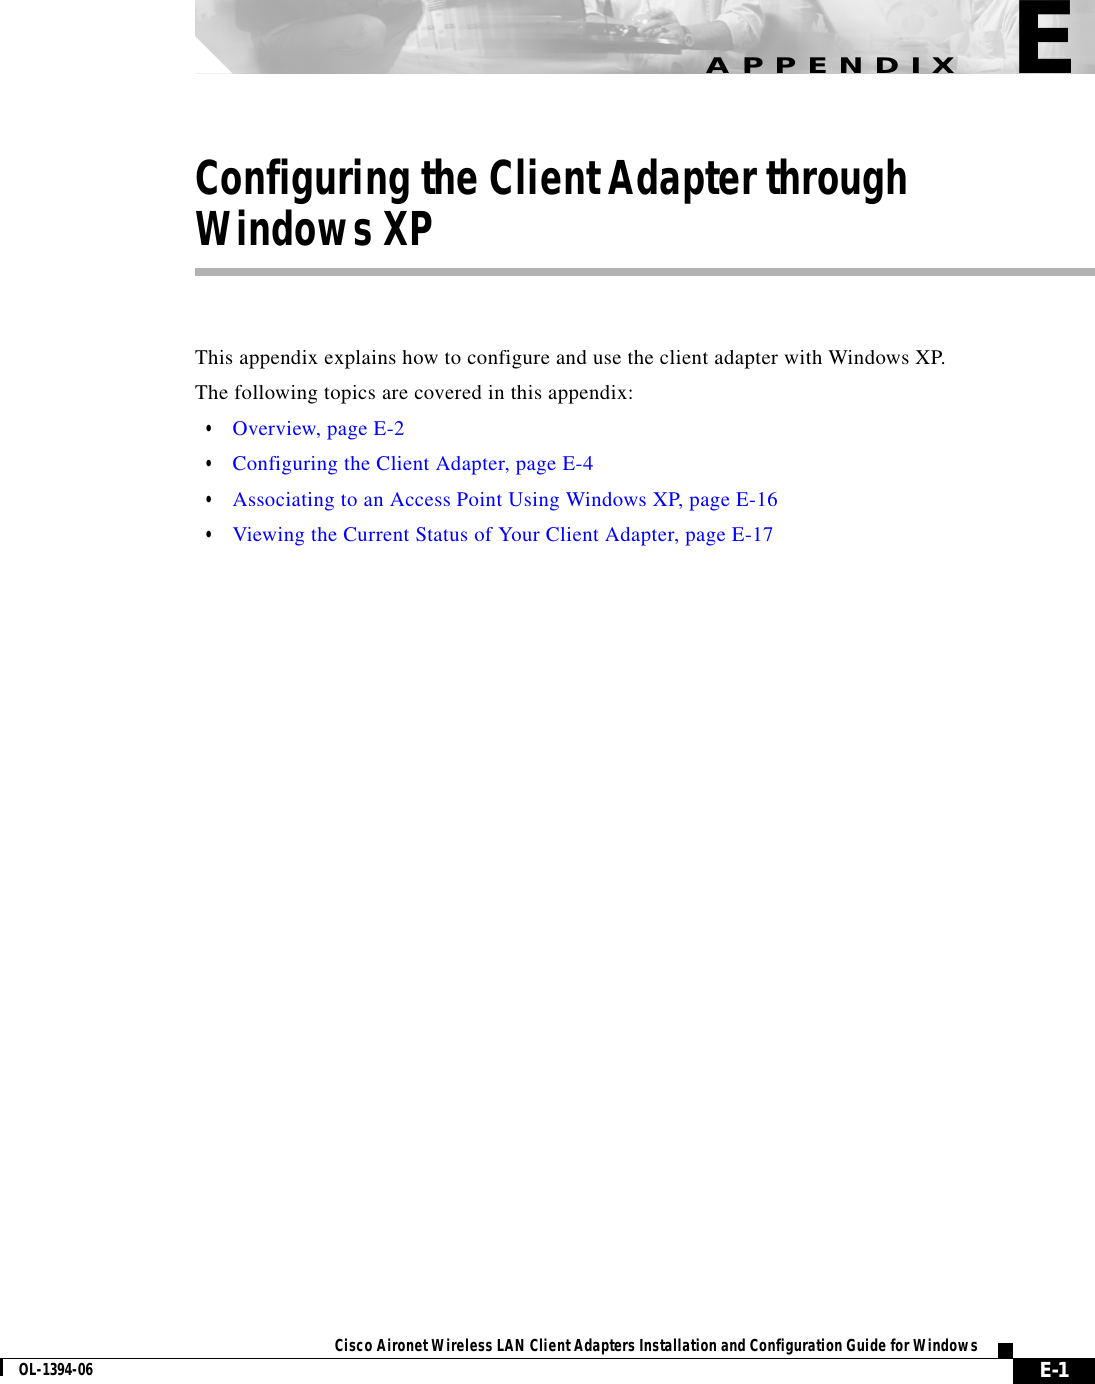 E-1Cisco Aironet Wireless LAN Client Adapters Installation and Configuration Guide for WindowsOL-1394-06APPENDIXEConfiguring the Client Adapter throughWindows XPThis appendix explains how to configure and use the client adapter with Windows XP.The following topics are covered in this appendix:•Overview, page E-2•Configuring the Client Adapter, page E-4•Associating to an Access Point Using Windows XP, page E-16•Viewing the Current Status of Your Client Adapter, page E-17